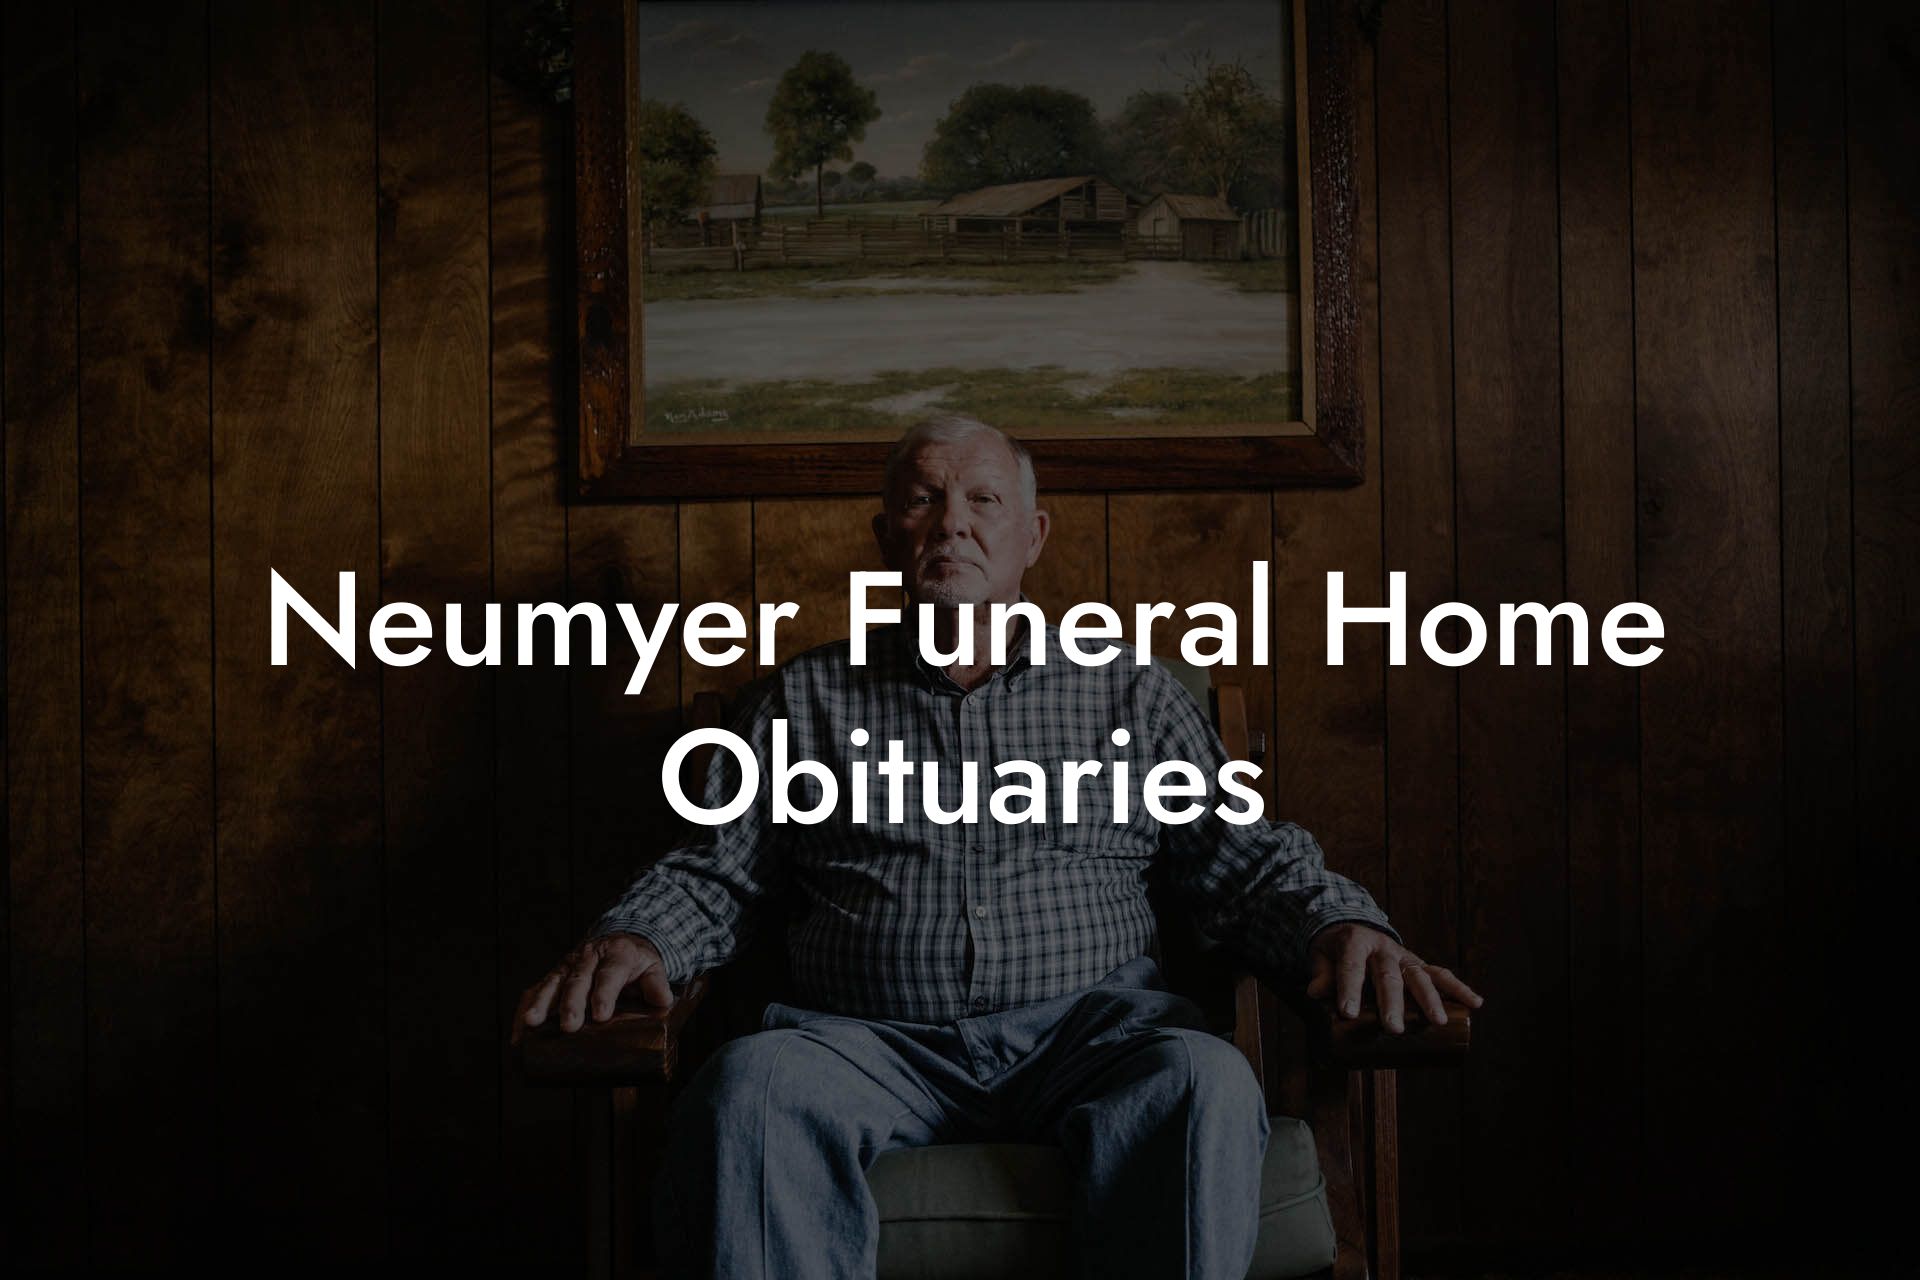 Neumyer Funeral Home Obituaries